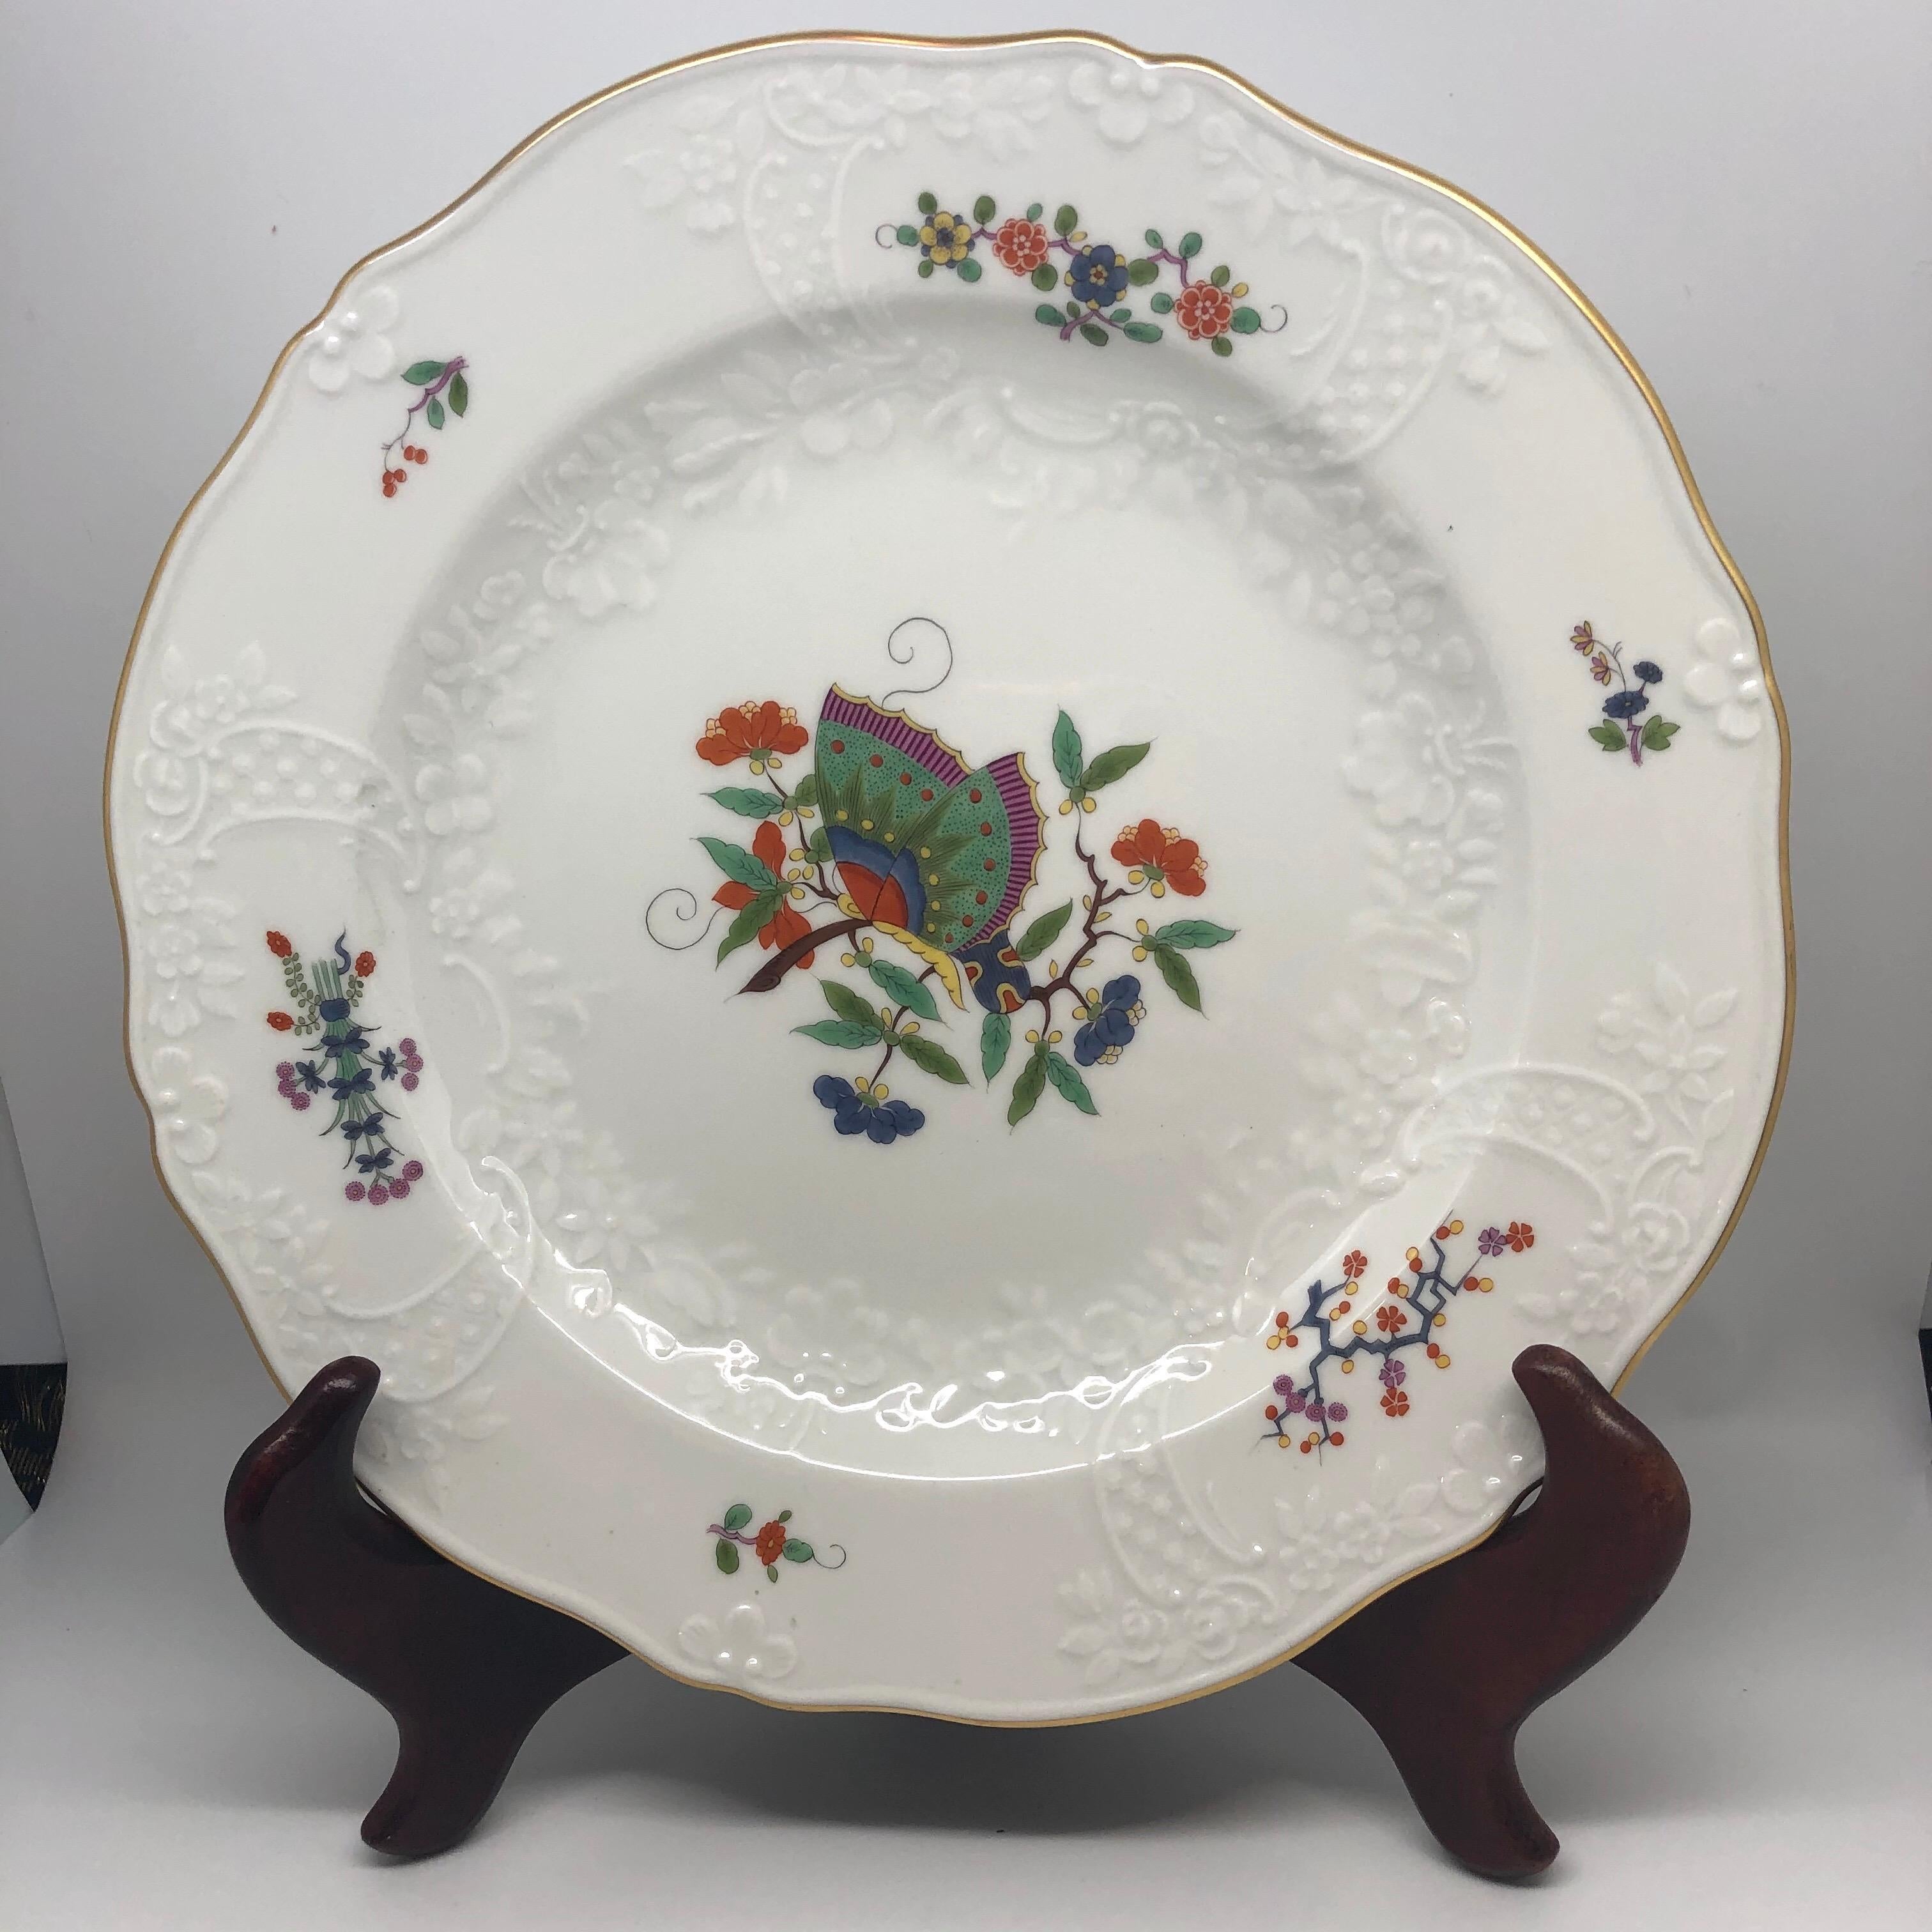 I am proud to offer you this famous and rare Meissen Chinese butterfly dinner service.  Each piece is painted in the Kakiemon style with a central Chinese butterfly on a branch, surrounded by flowering branches. The central part of the plates is